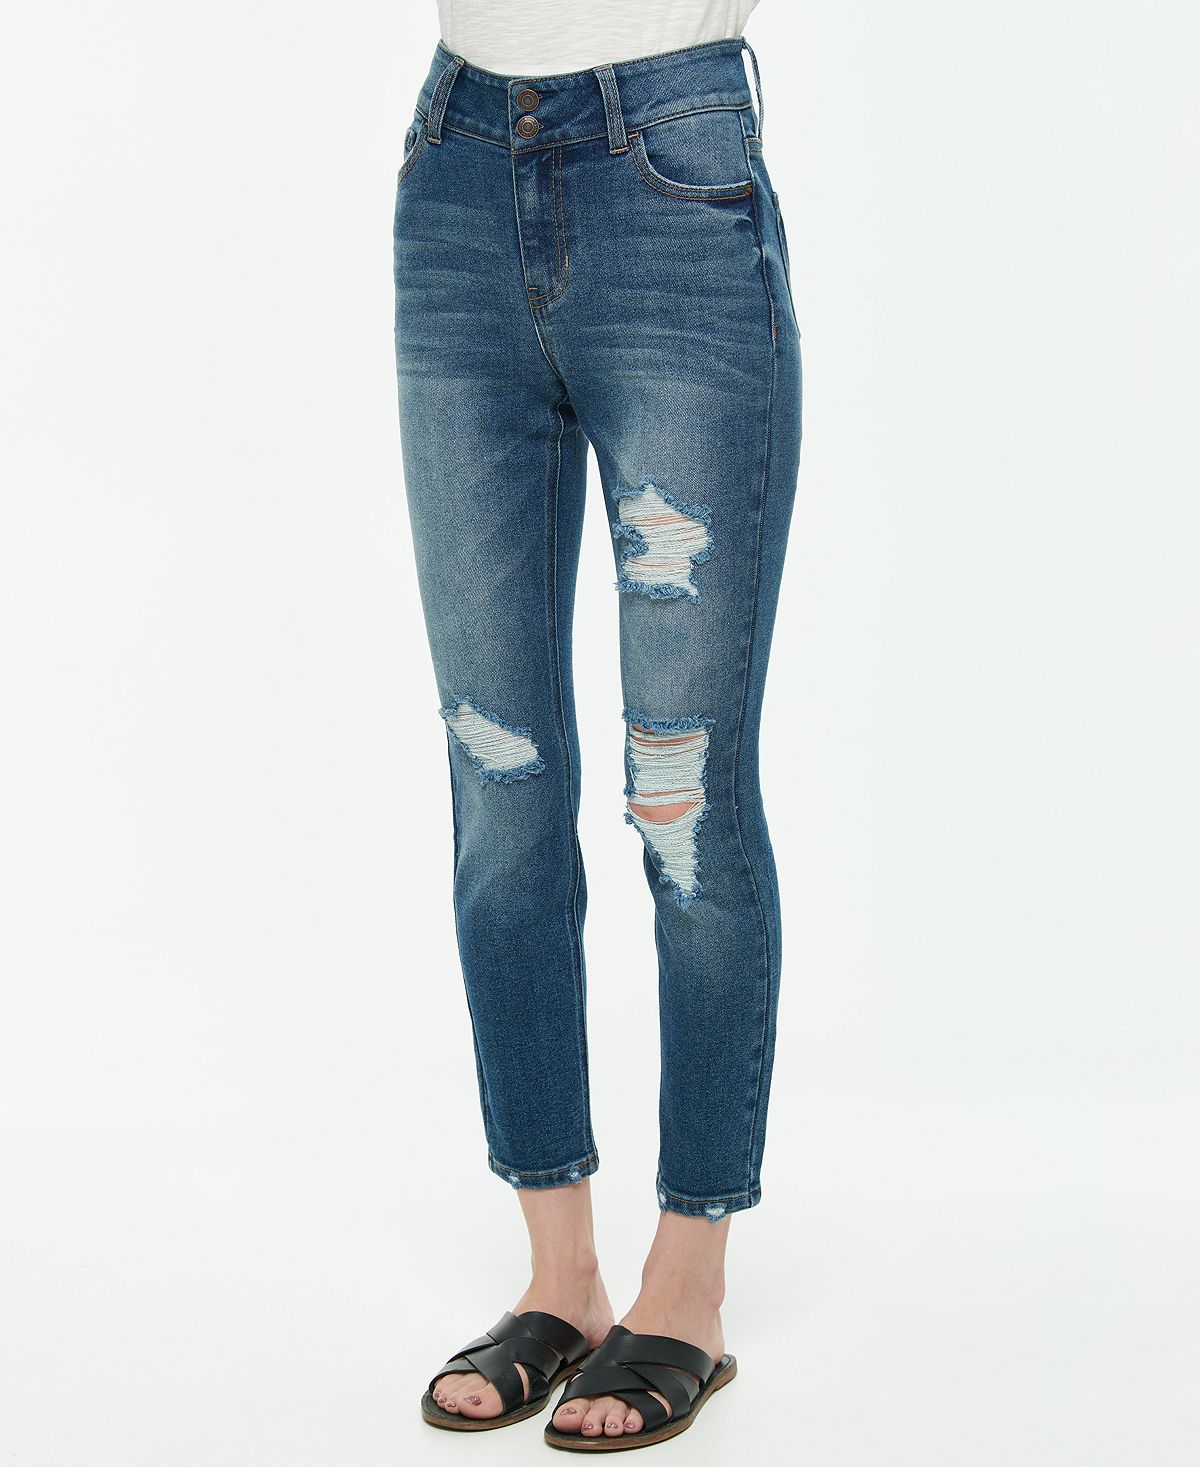 Vanilla Star Juniors' Double-button High-rise Skinny Jeans Augusto